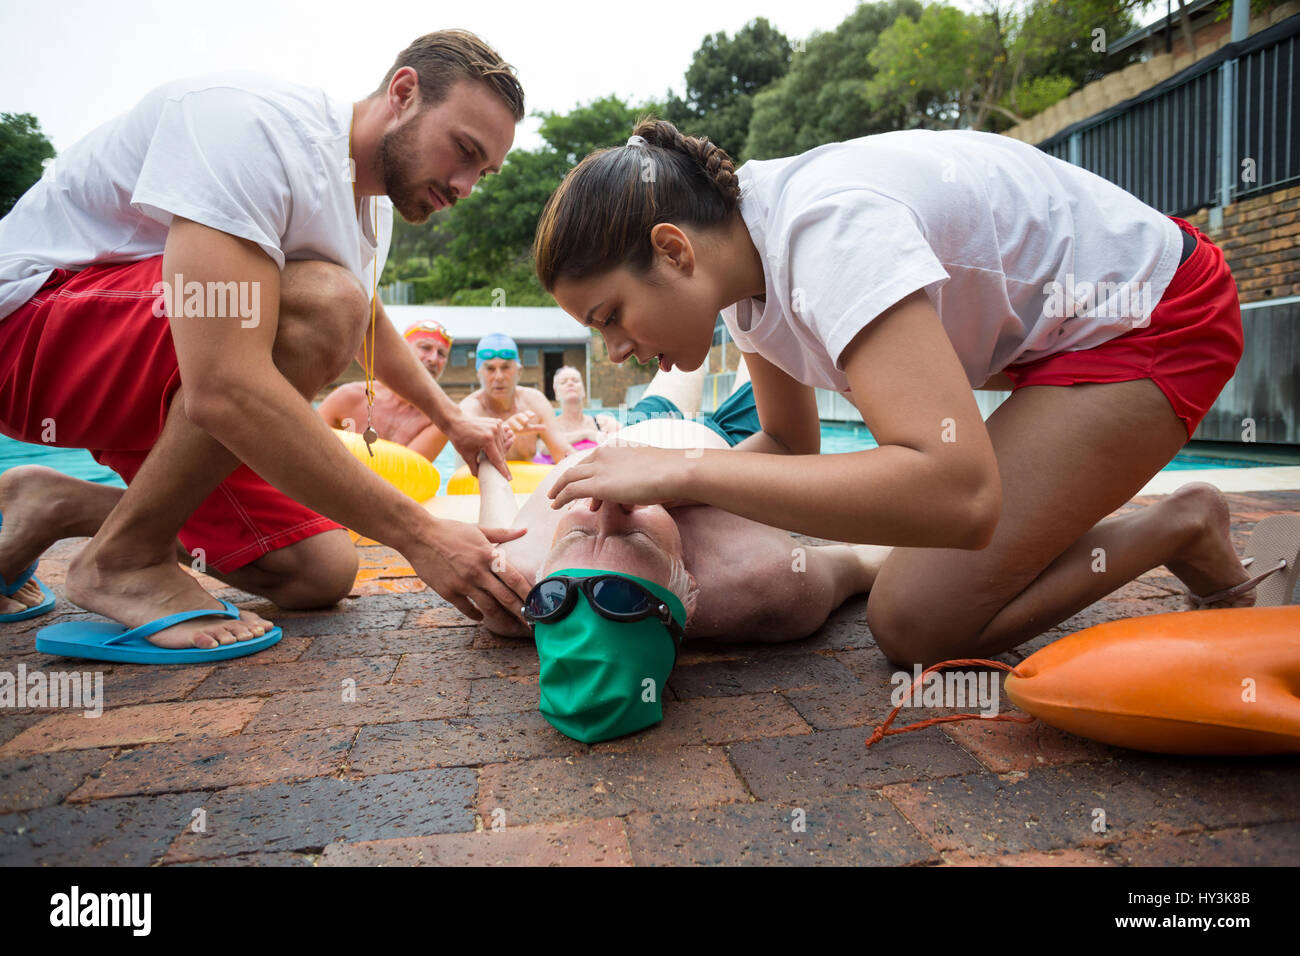 Male and female rescue workers helping unconscious senior man at poolside Stock Photo